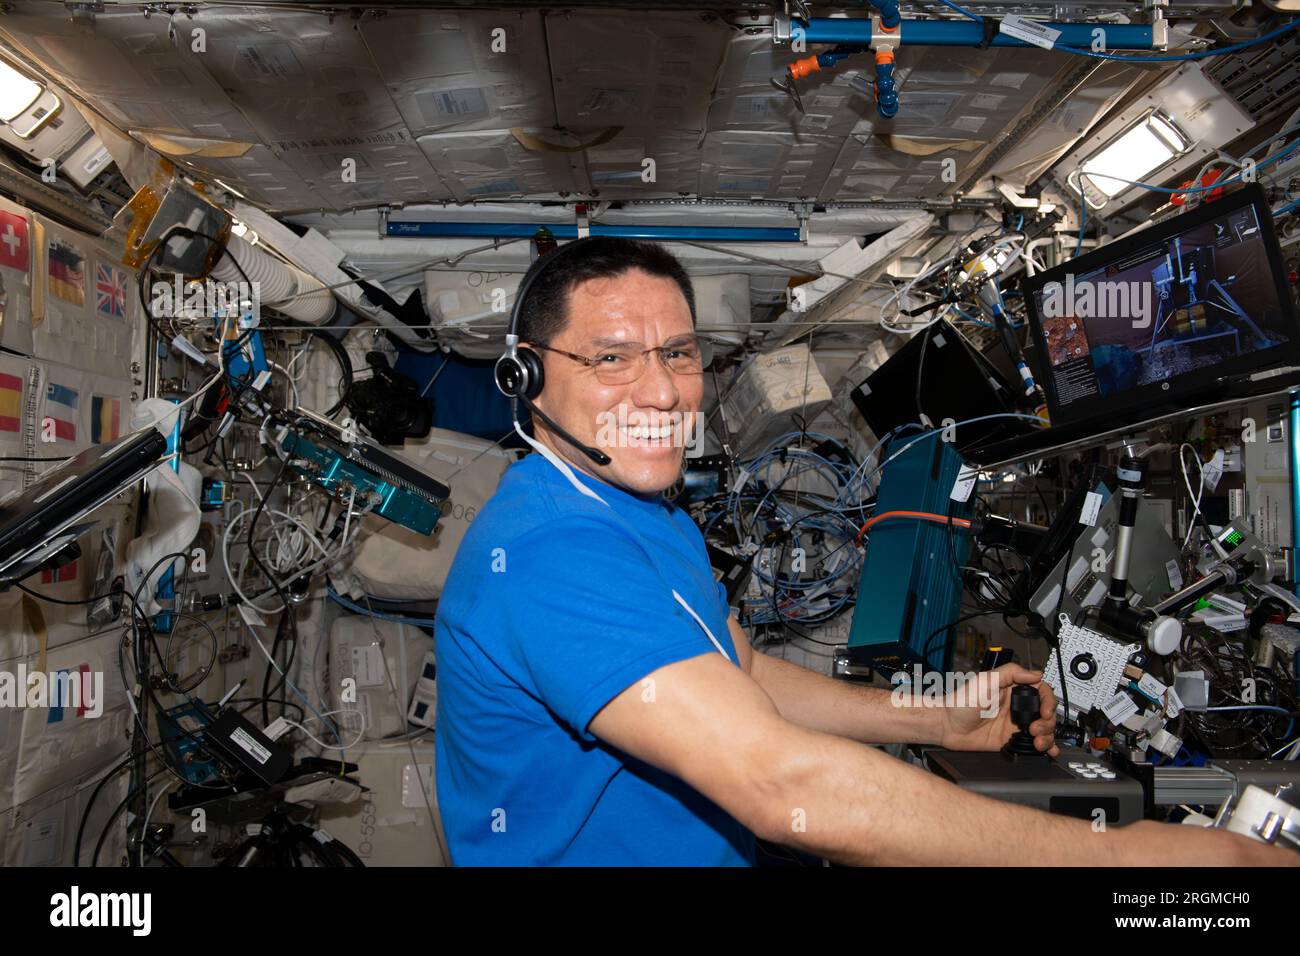 International Space Station, Earth Orbit. 24th July, 2023. International Space Station, Earth Orbit. 24 July, 2023. NASA astronaut and Expedition 68 Flight Engineer Frank Rubio completes a Surface Avatar session in the Columbus Laboratory Module aboard the International Space Station, July 24, 2023 in Earth Orbit. Surface Avatar investigates how haptic controls, user interfaces and virtual reality could command and control surface-bound robots from long distances. Credit: NASA/NASA/Alamy Live News Stock Photo